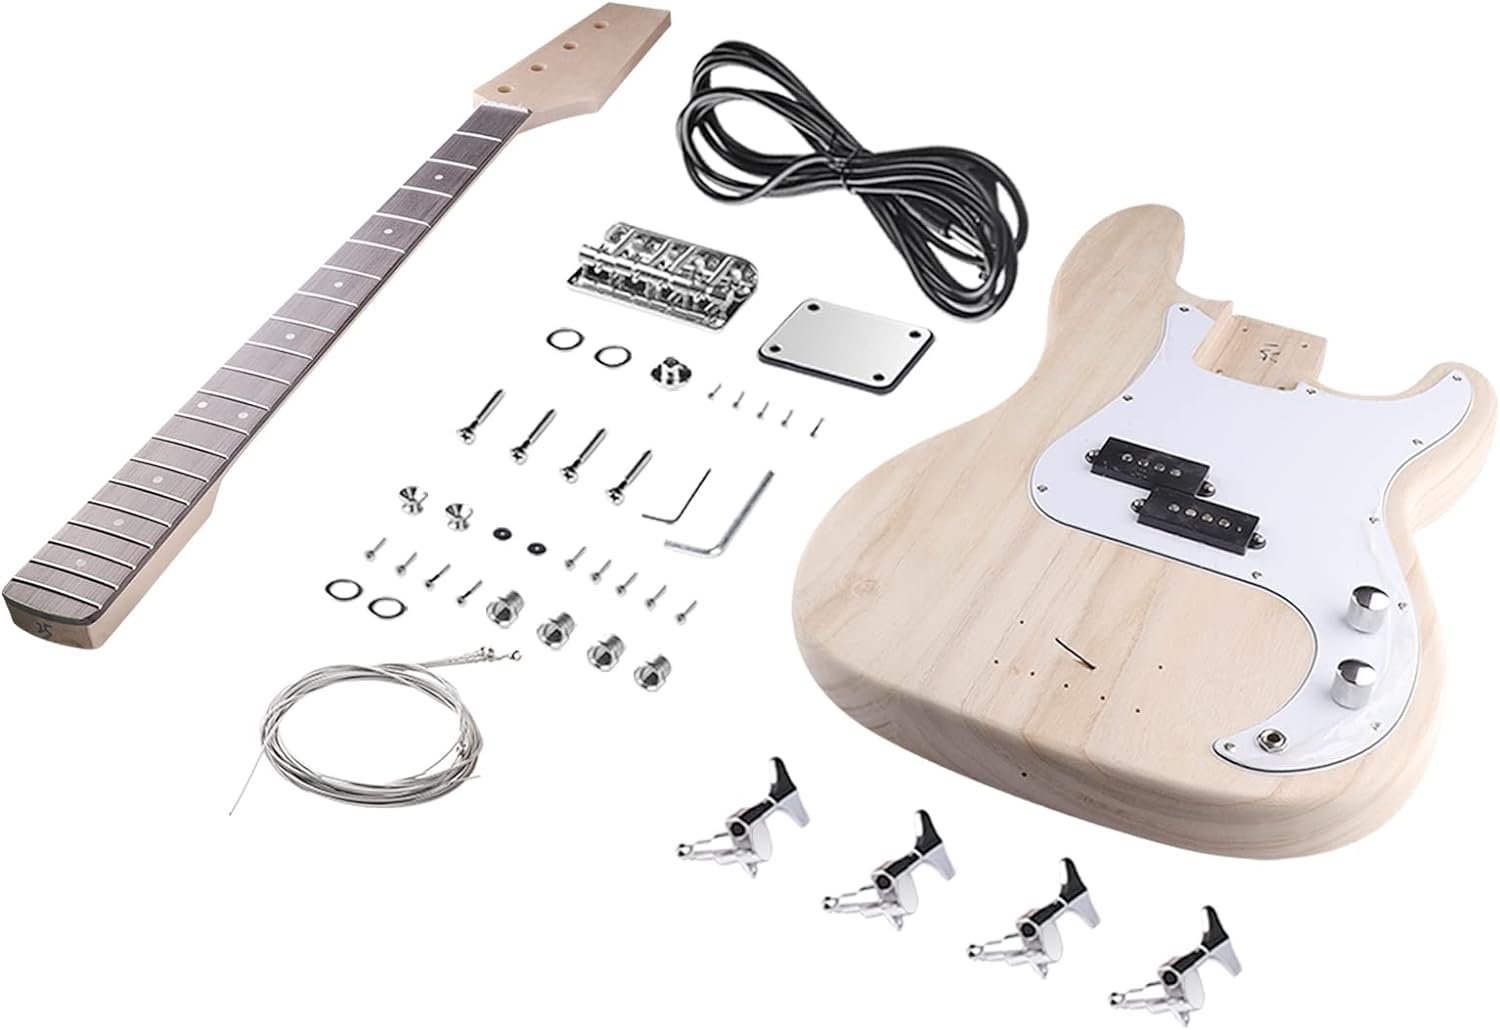 DIY Bass Guitar Kit Beginner Kits PB Bass Style 4 String Right Handed with Paulownia Body Hard Maple Neck DYED Poplar Laminated Fingerboard Chrome Hardware Build Your Own Guitar.